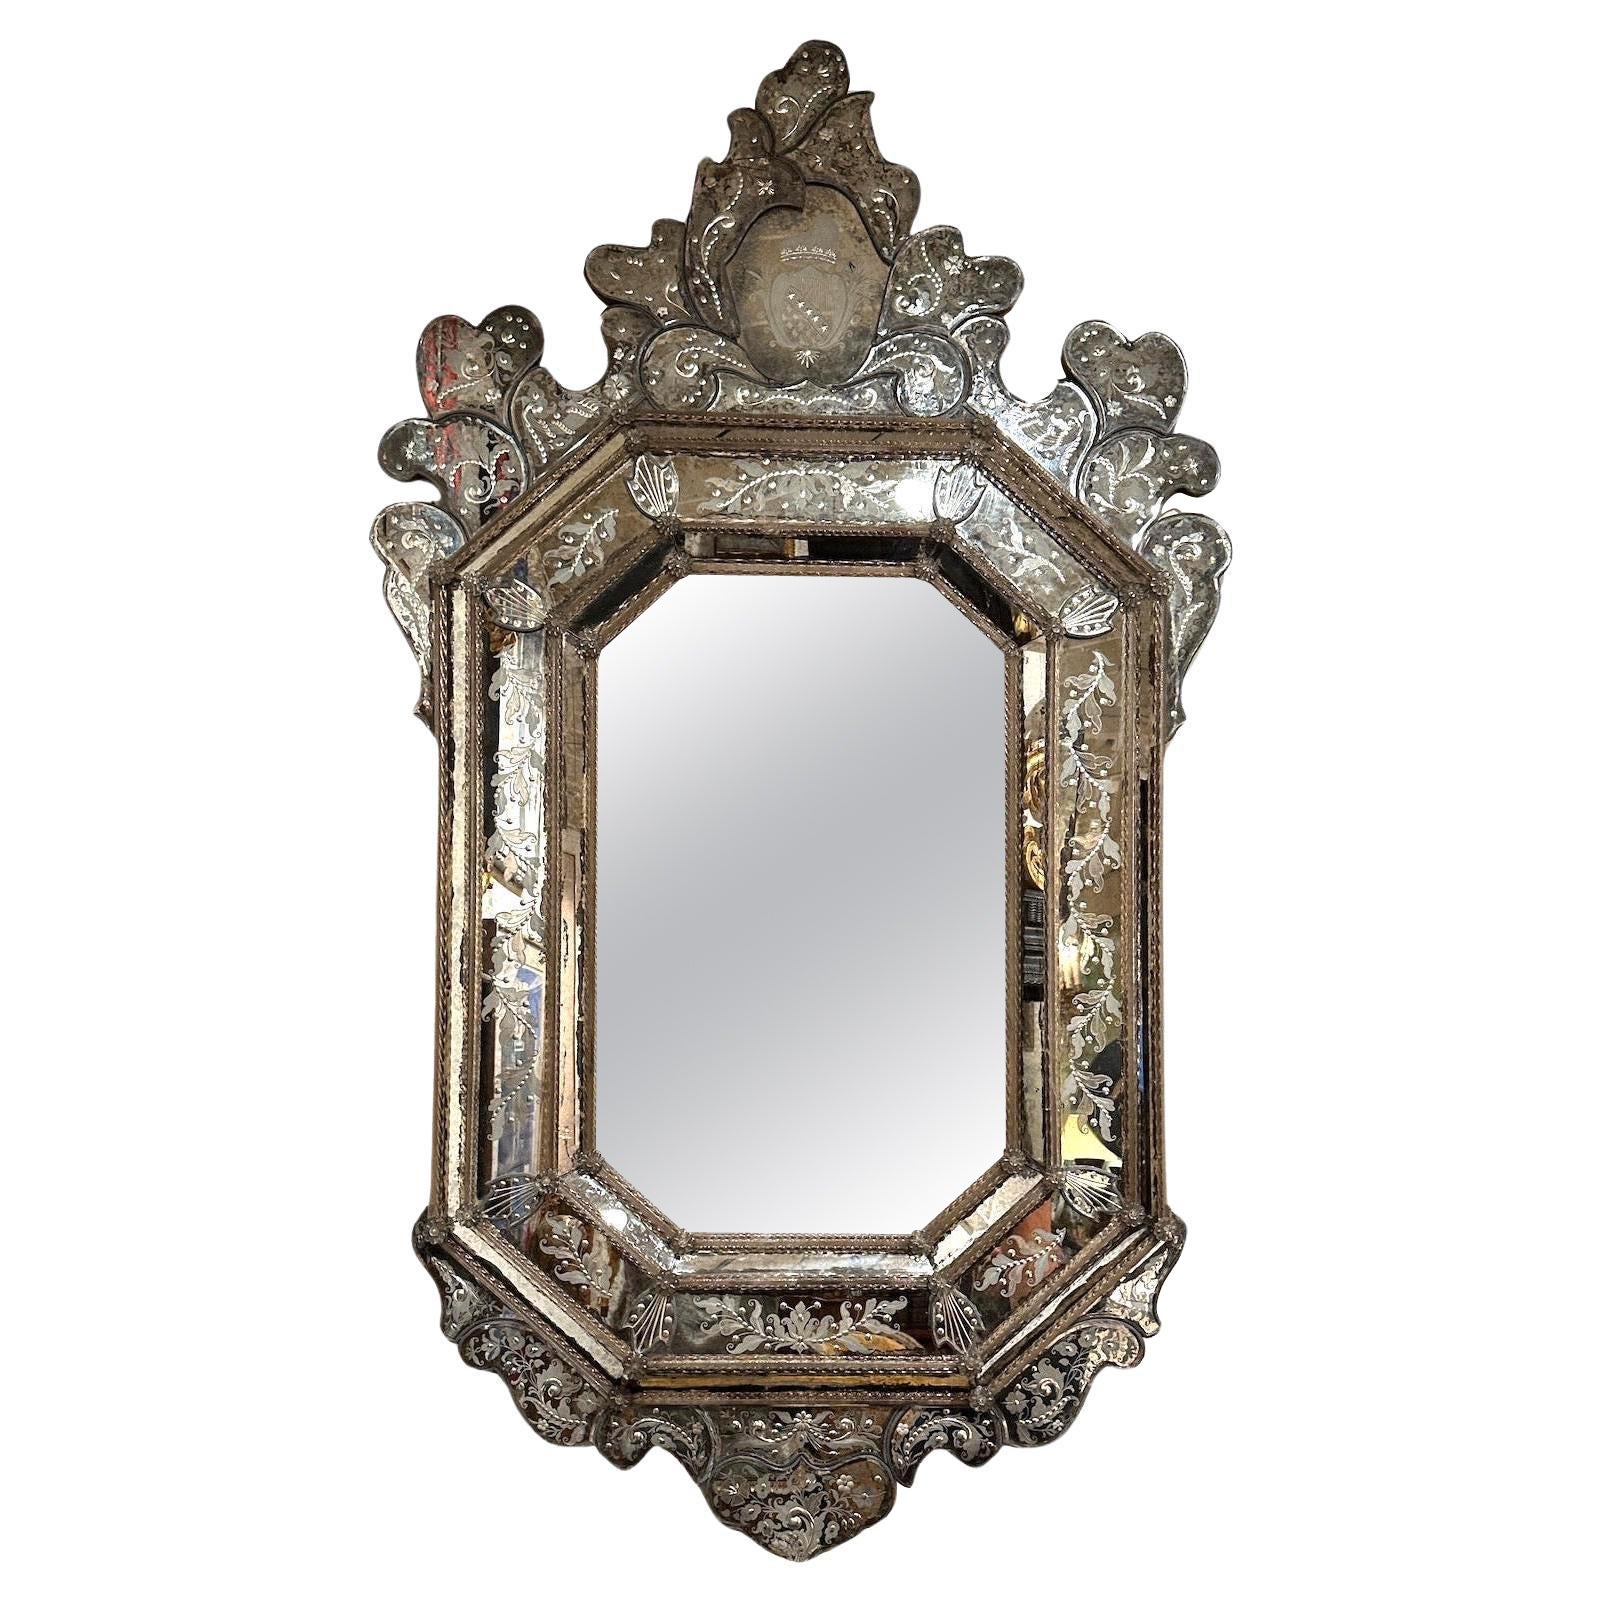 What is a Murano mirror?